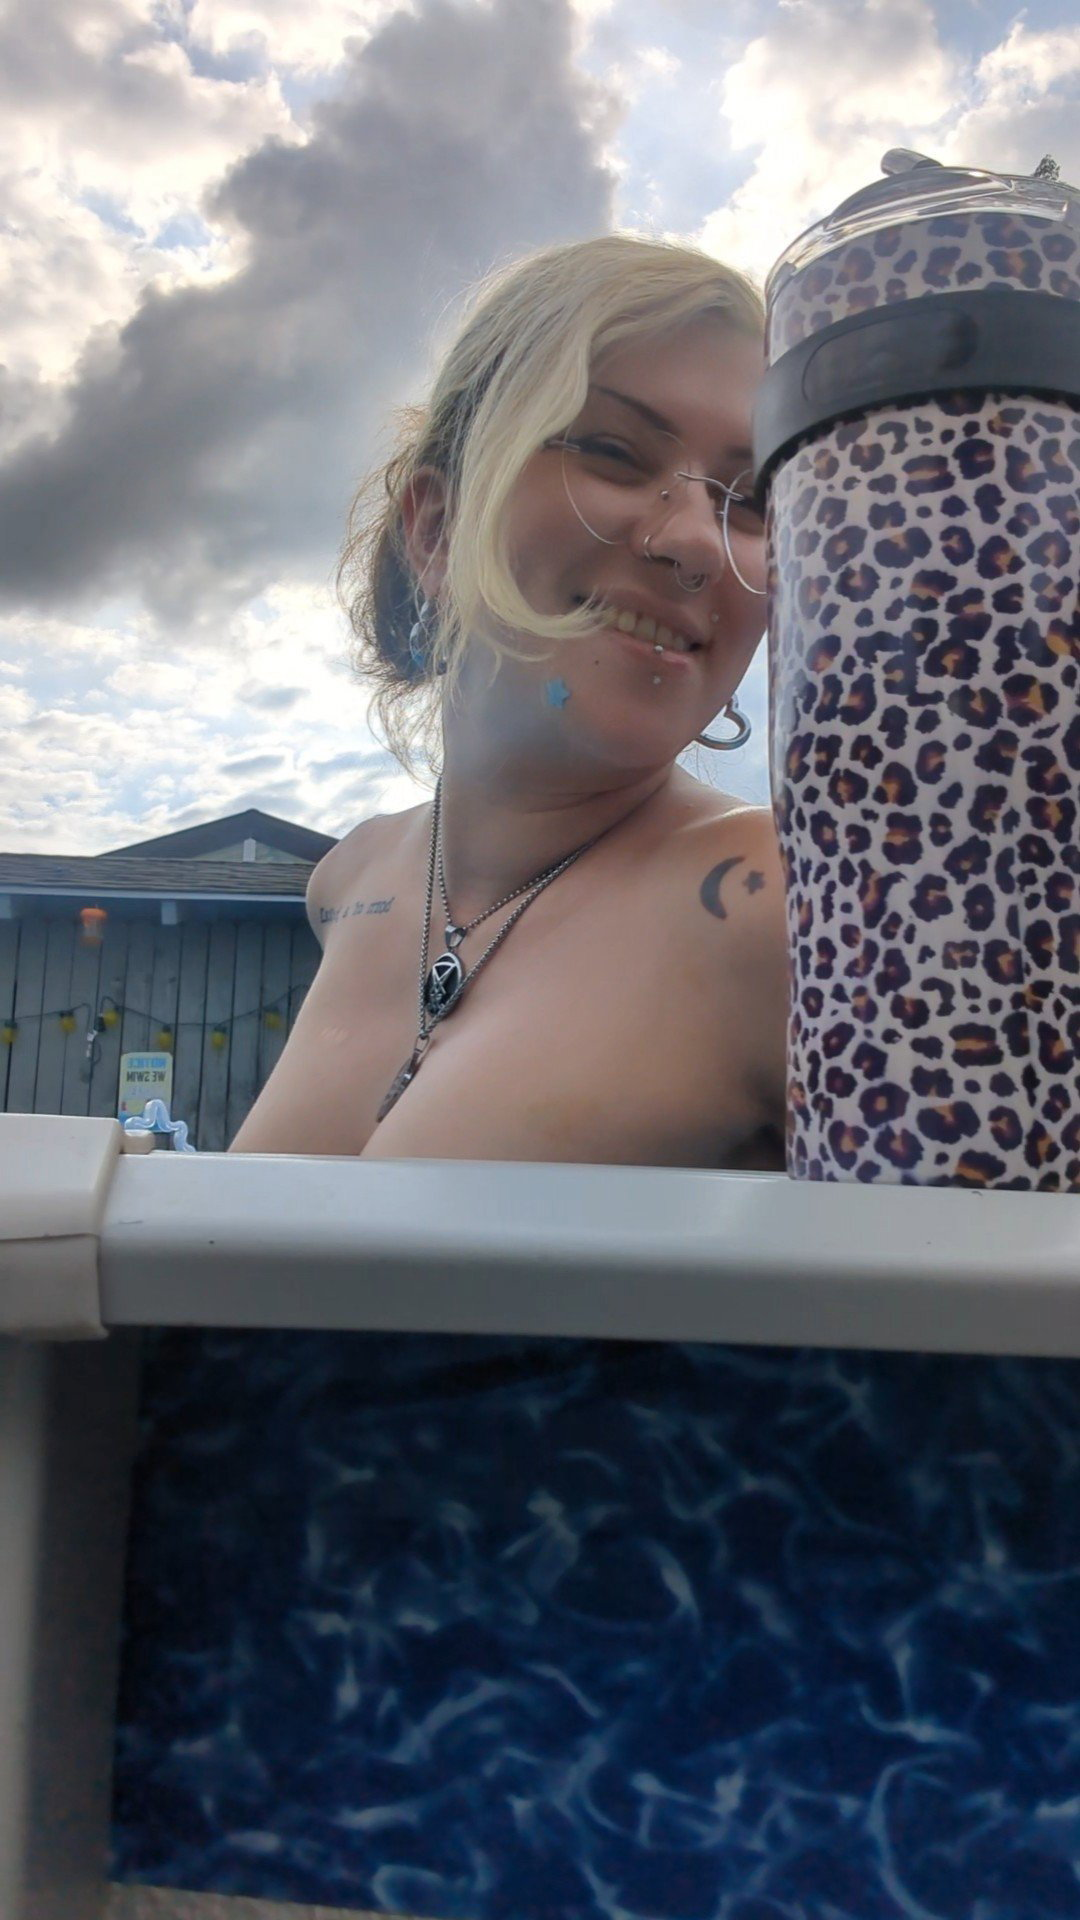 Photo by fonda ⛧ feral slut with the username @fondaisferal, who is a star user,  August 3, 2023 at 11:09 PM. The post is about the topic MILF and the text says 'It's been so hot and muggy lately when I got the chance to come float around the pool at my local adult lifestyle club today, I took it! The water feels amazing, we just need some more awesome people to come out to really kick off a fun Thirsty Thursday..'